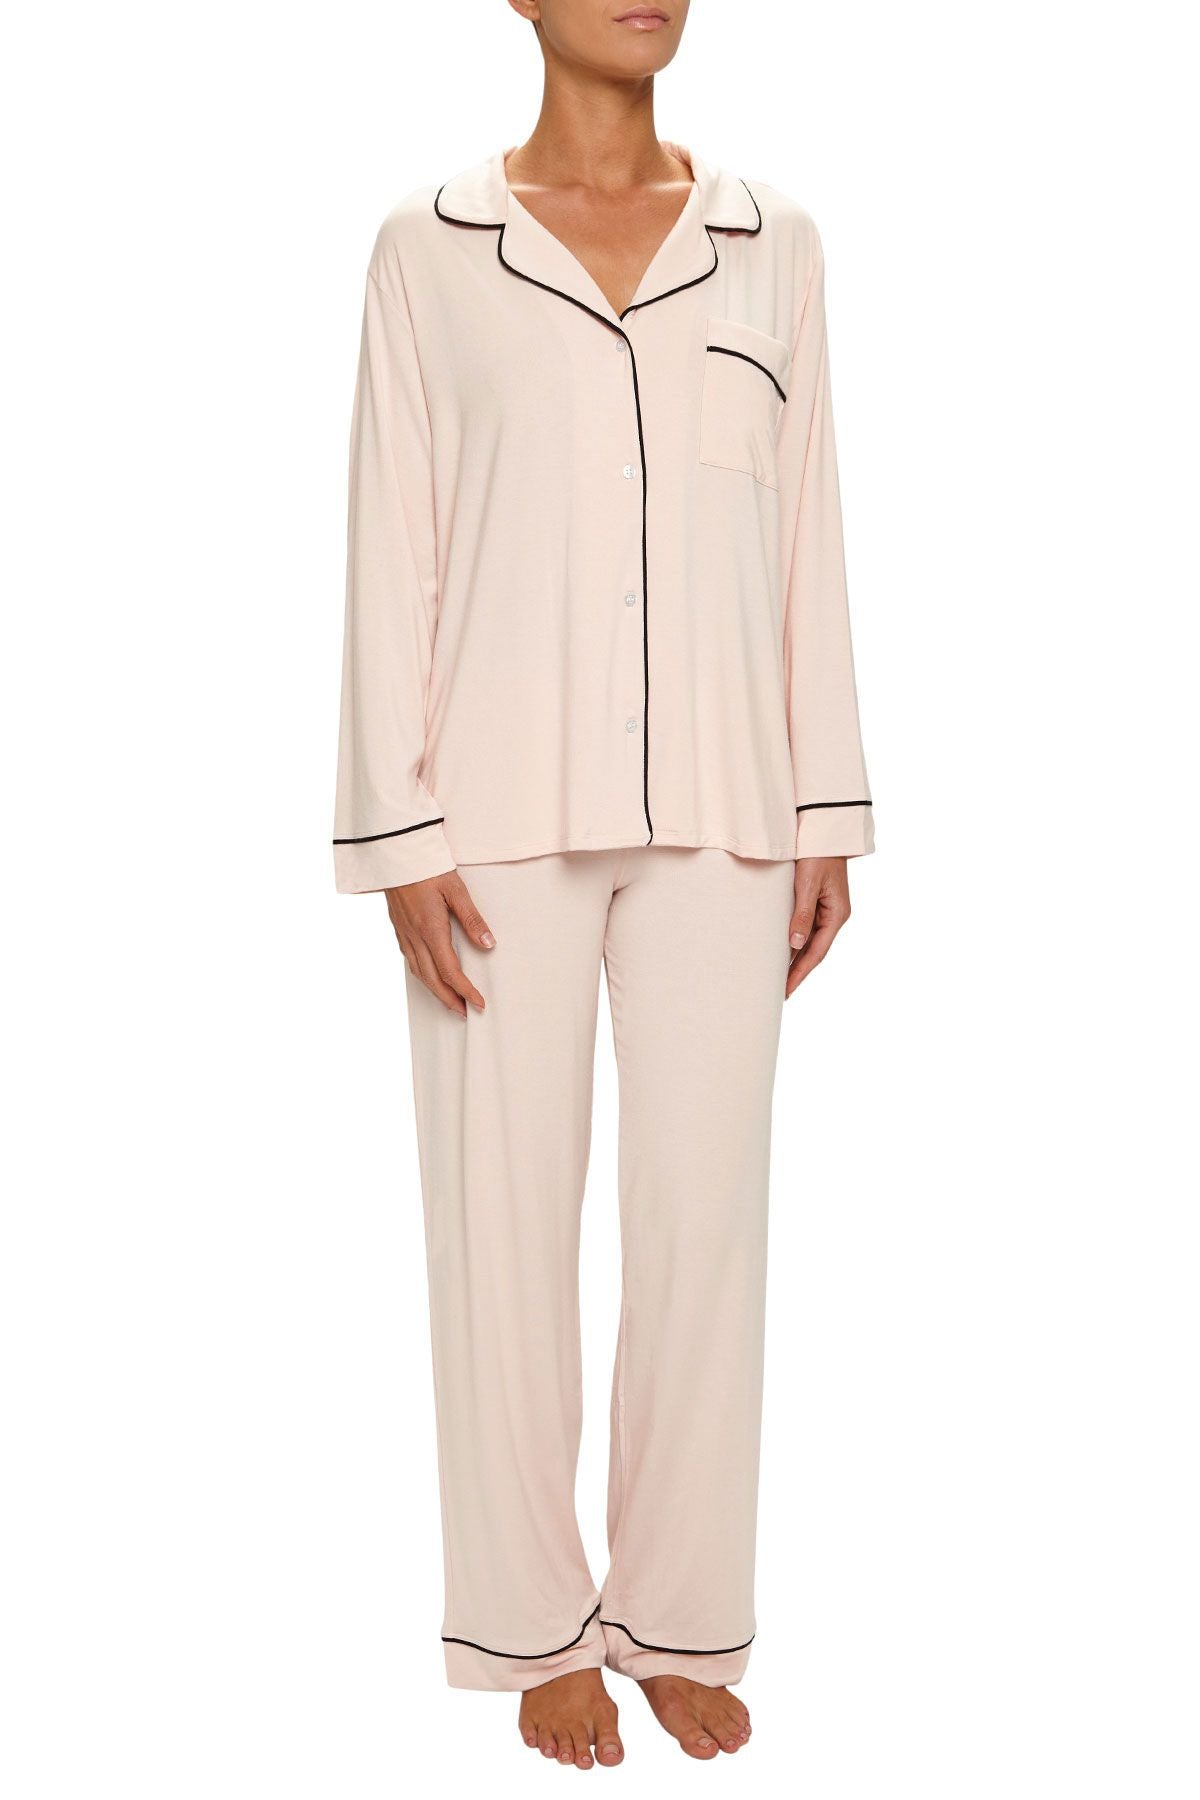 Eberjey Gisele The Long Pj Set SORBET PINK/BLACK buy for the best price  CAD$ 206.00 - Canada and U.S. delivery – Bralissimo